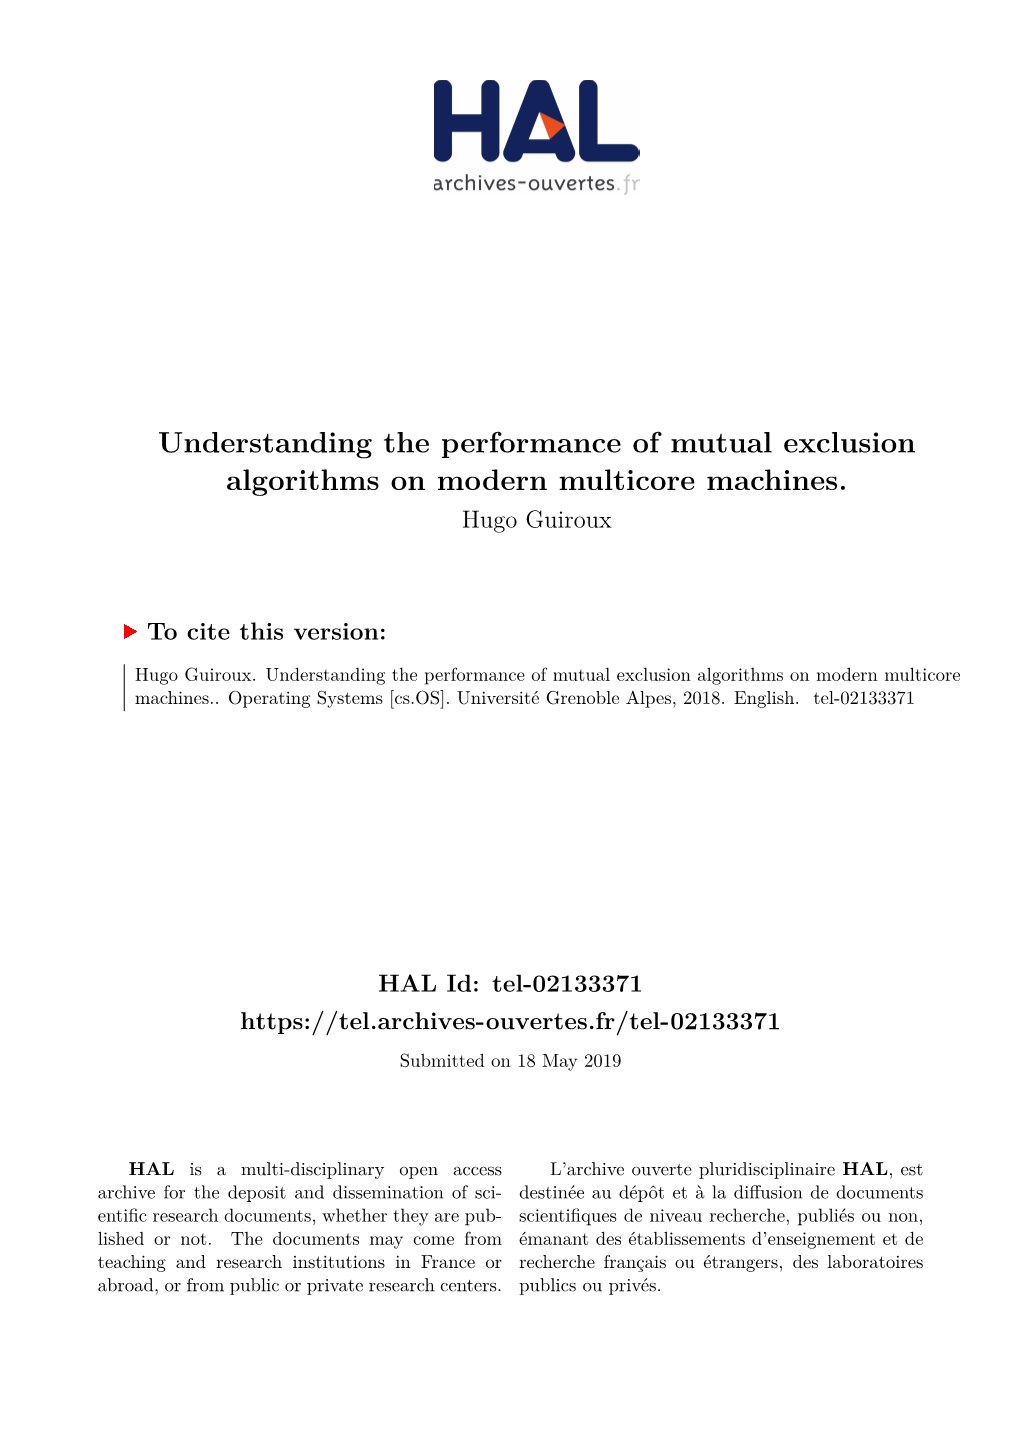 Understanding the Performance of Mutual Exclusion Algorithms on Modern Multicore Machines